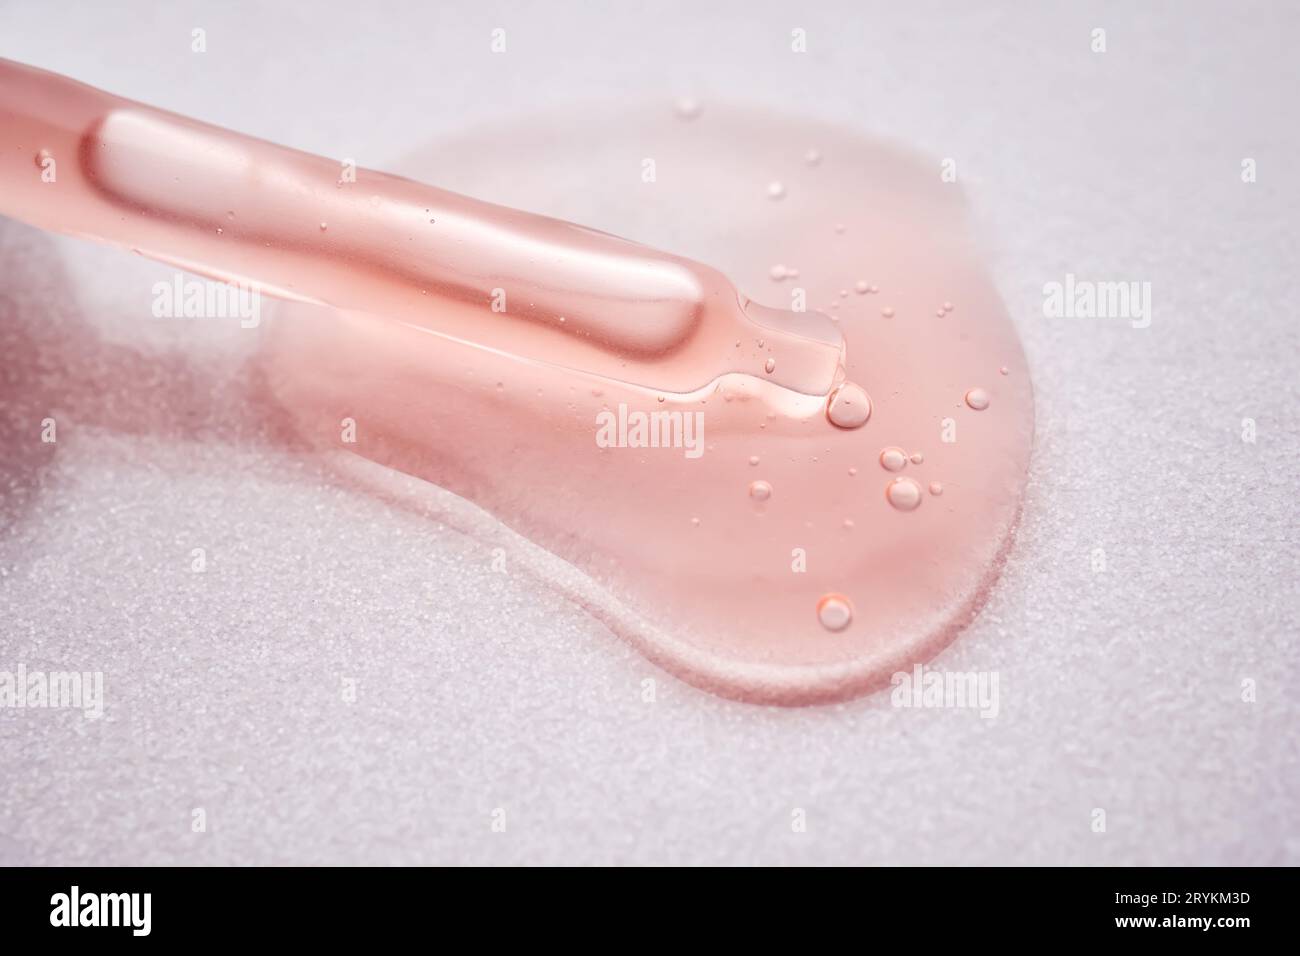 A pipette with a viscous pink cosmetic lies in a drop. Stock Photo